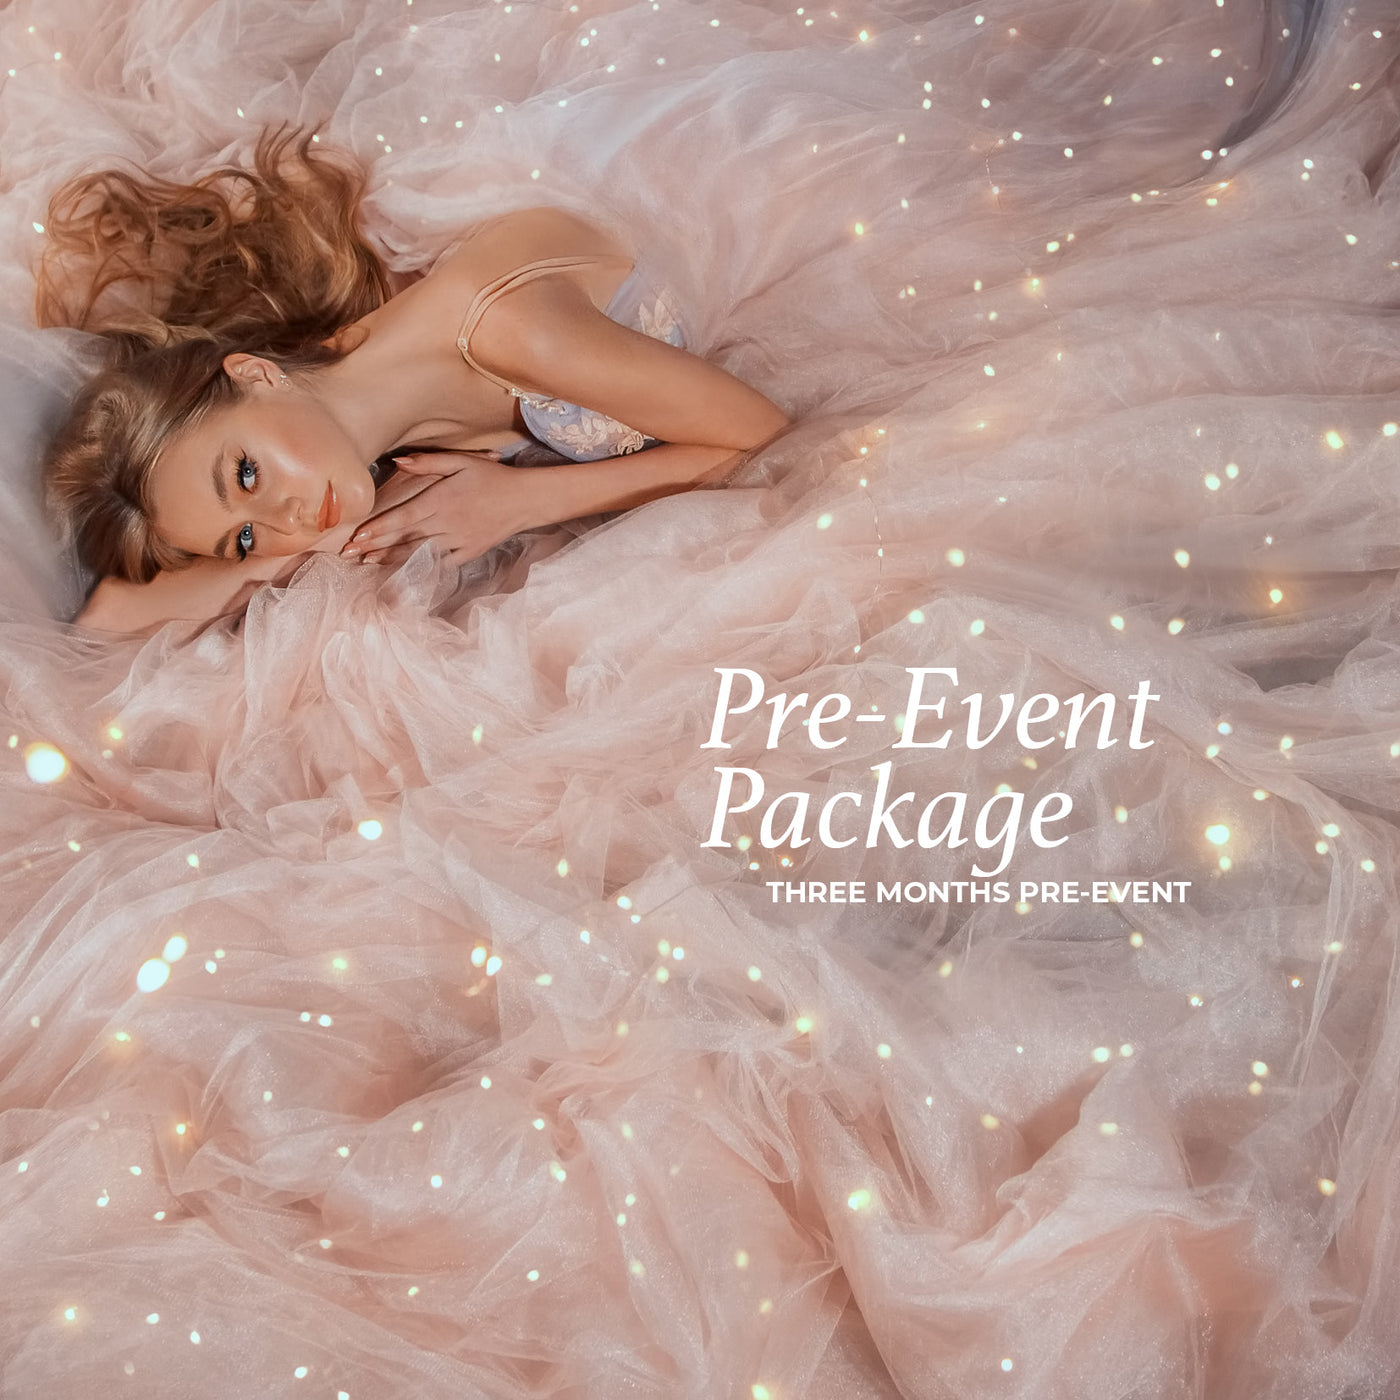 Special Event Package - 3 Months Pre-Event